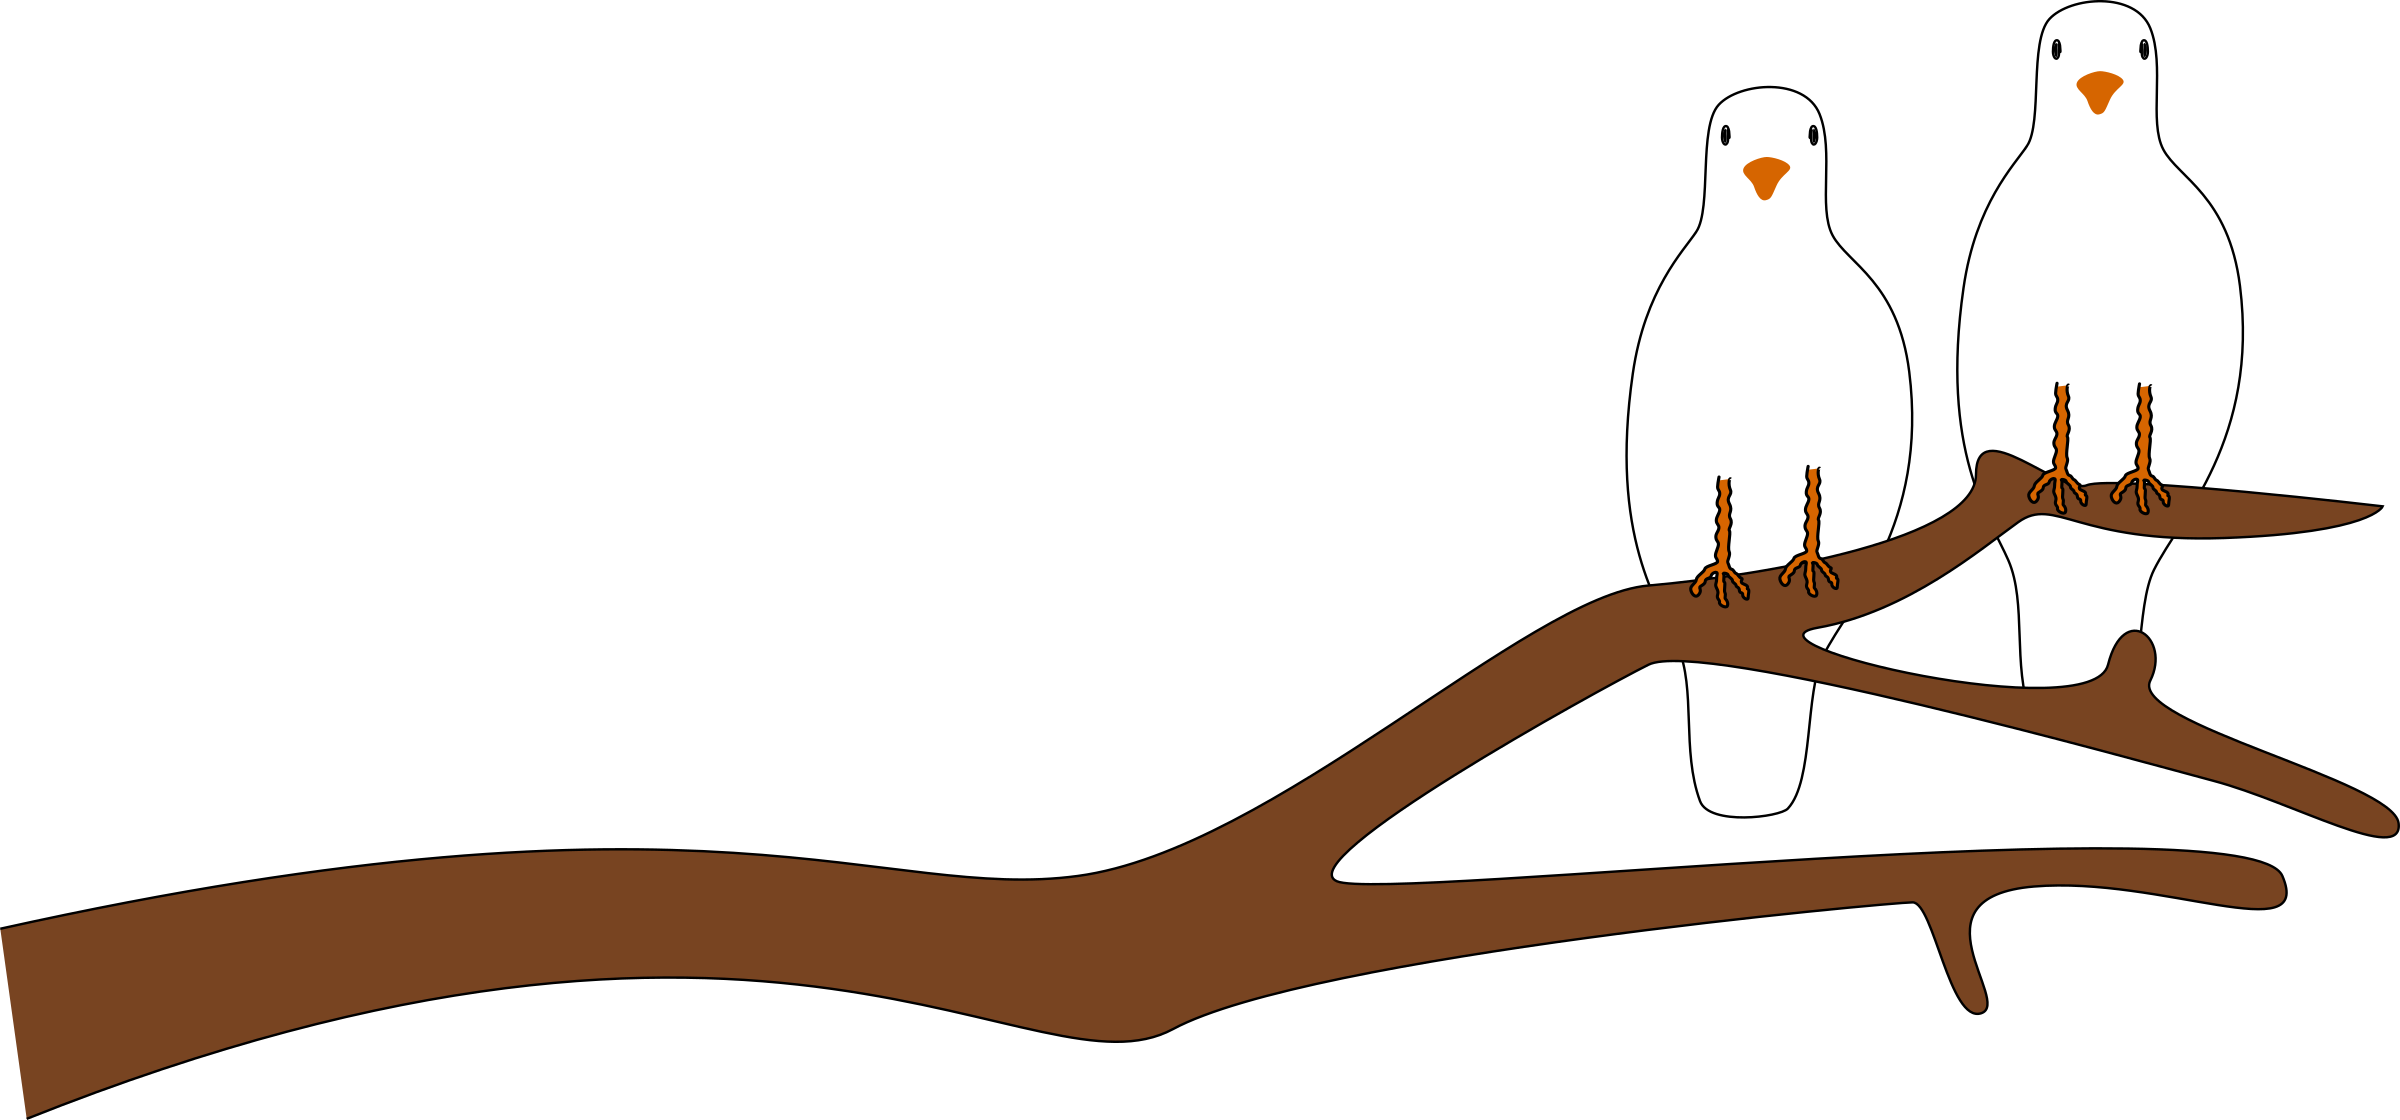 Clipart bird branch. Doves on a for